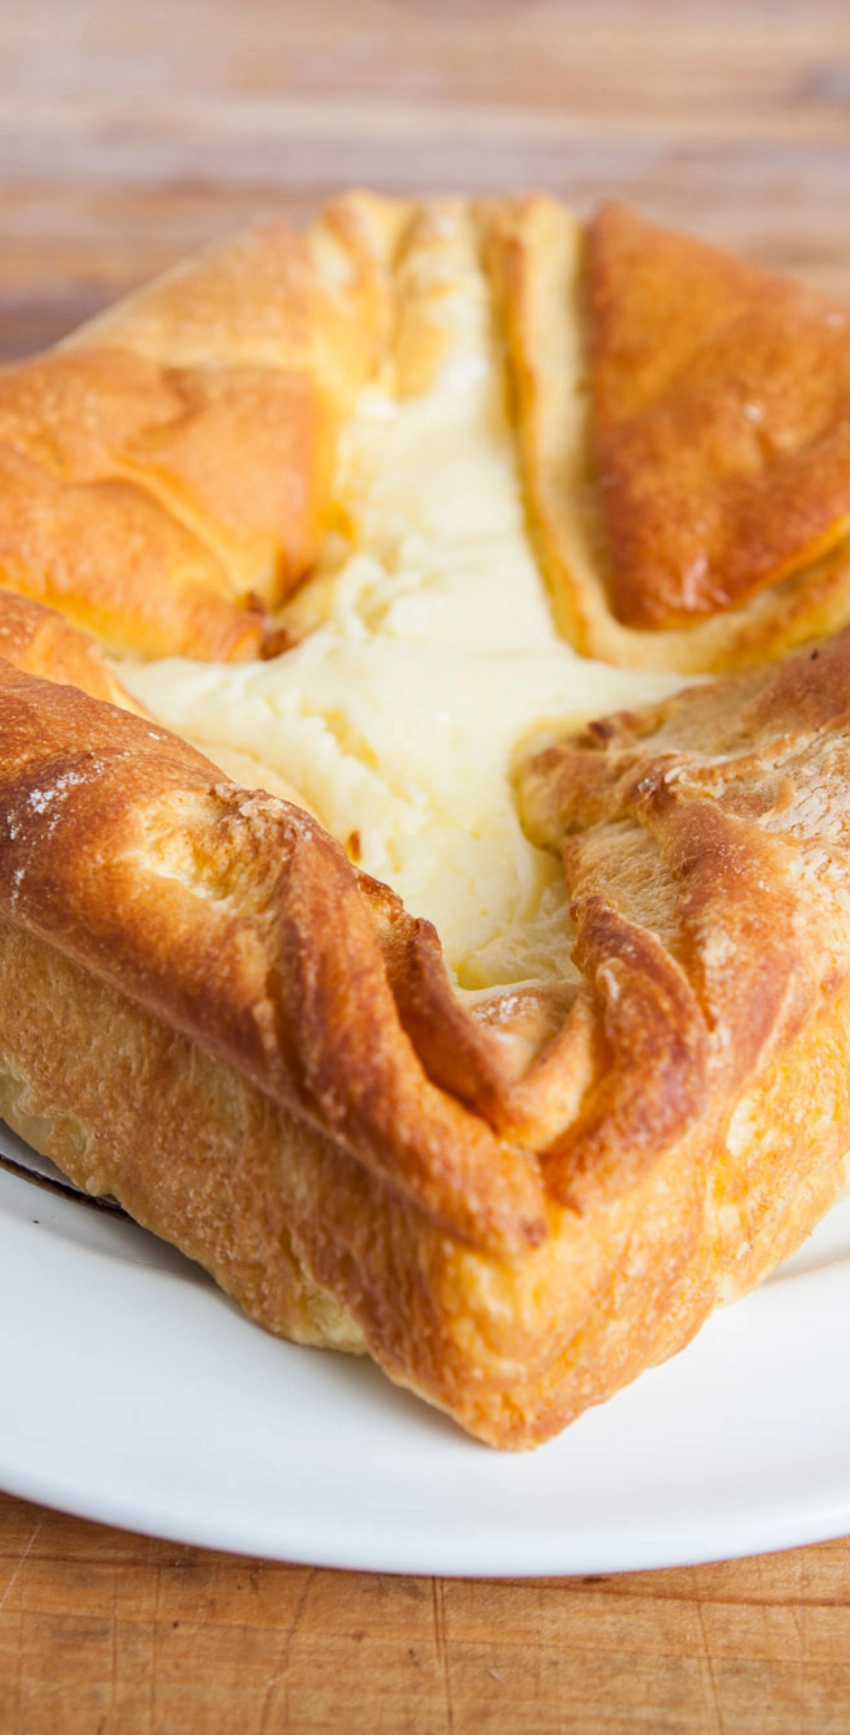 A close-up shot of a baked puff pastry filled with creamy cheese, served on a white plate.